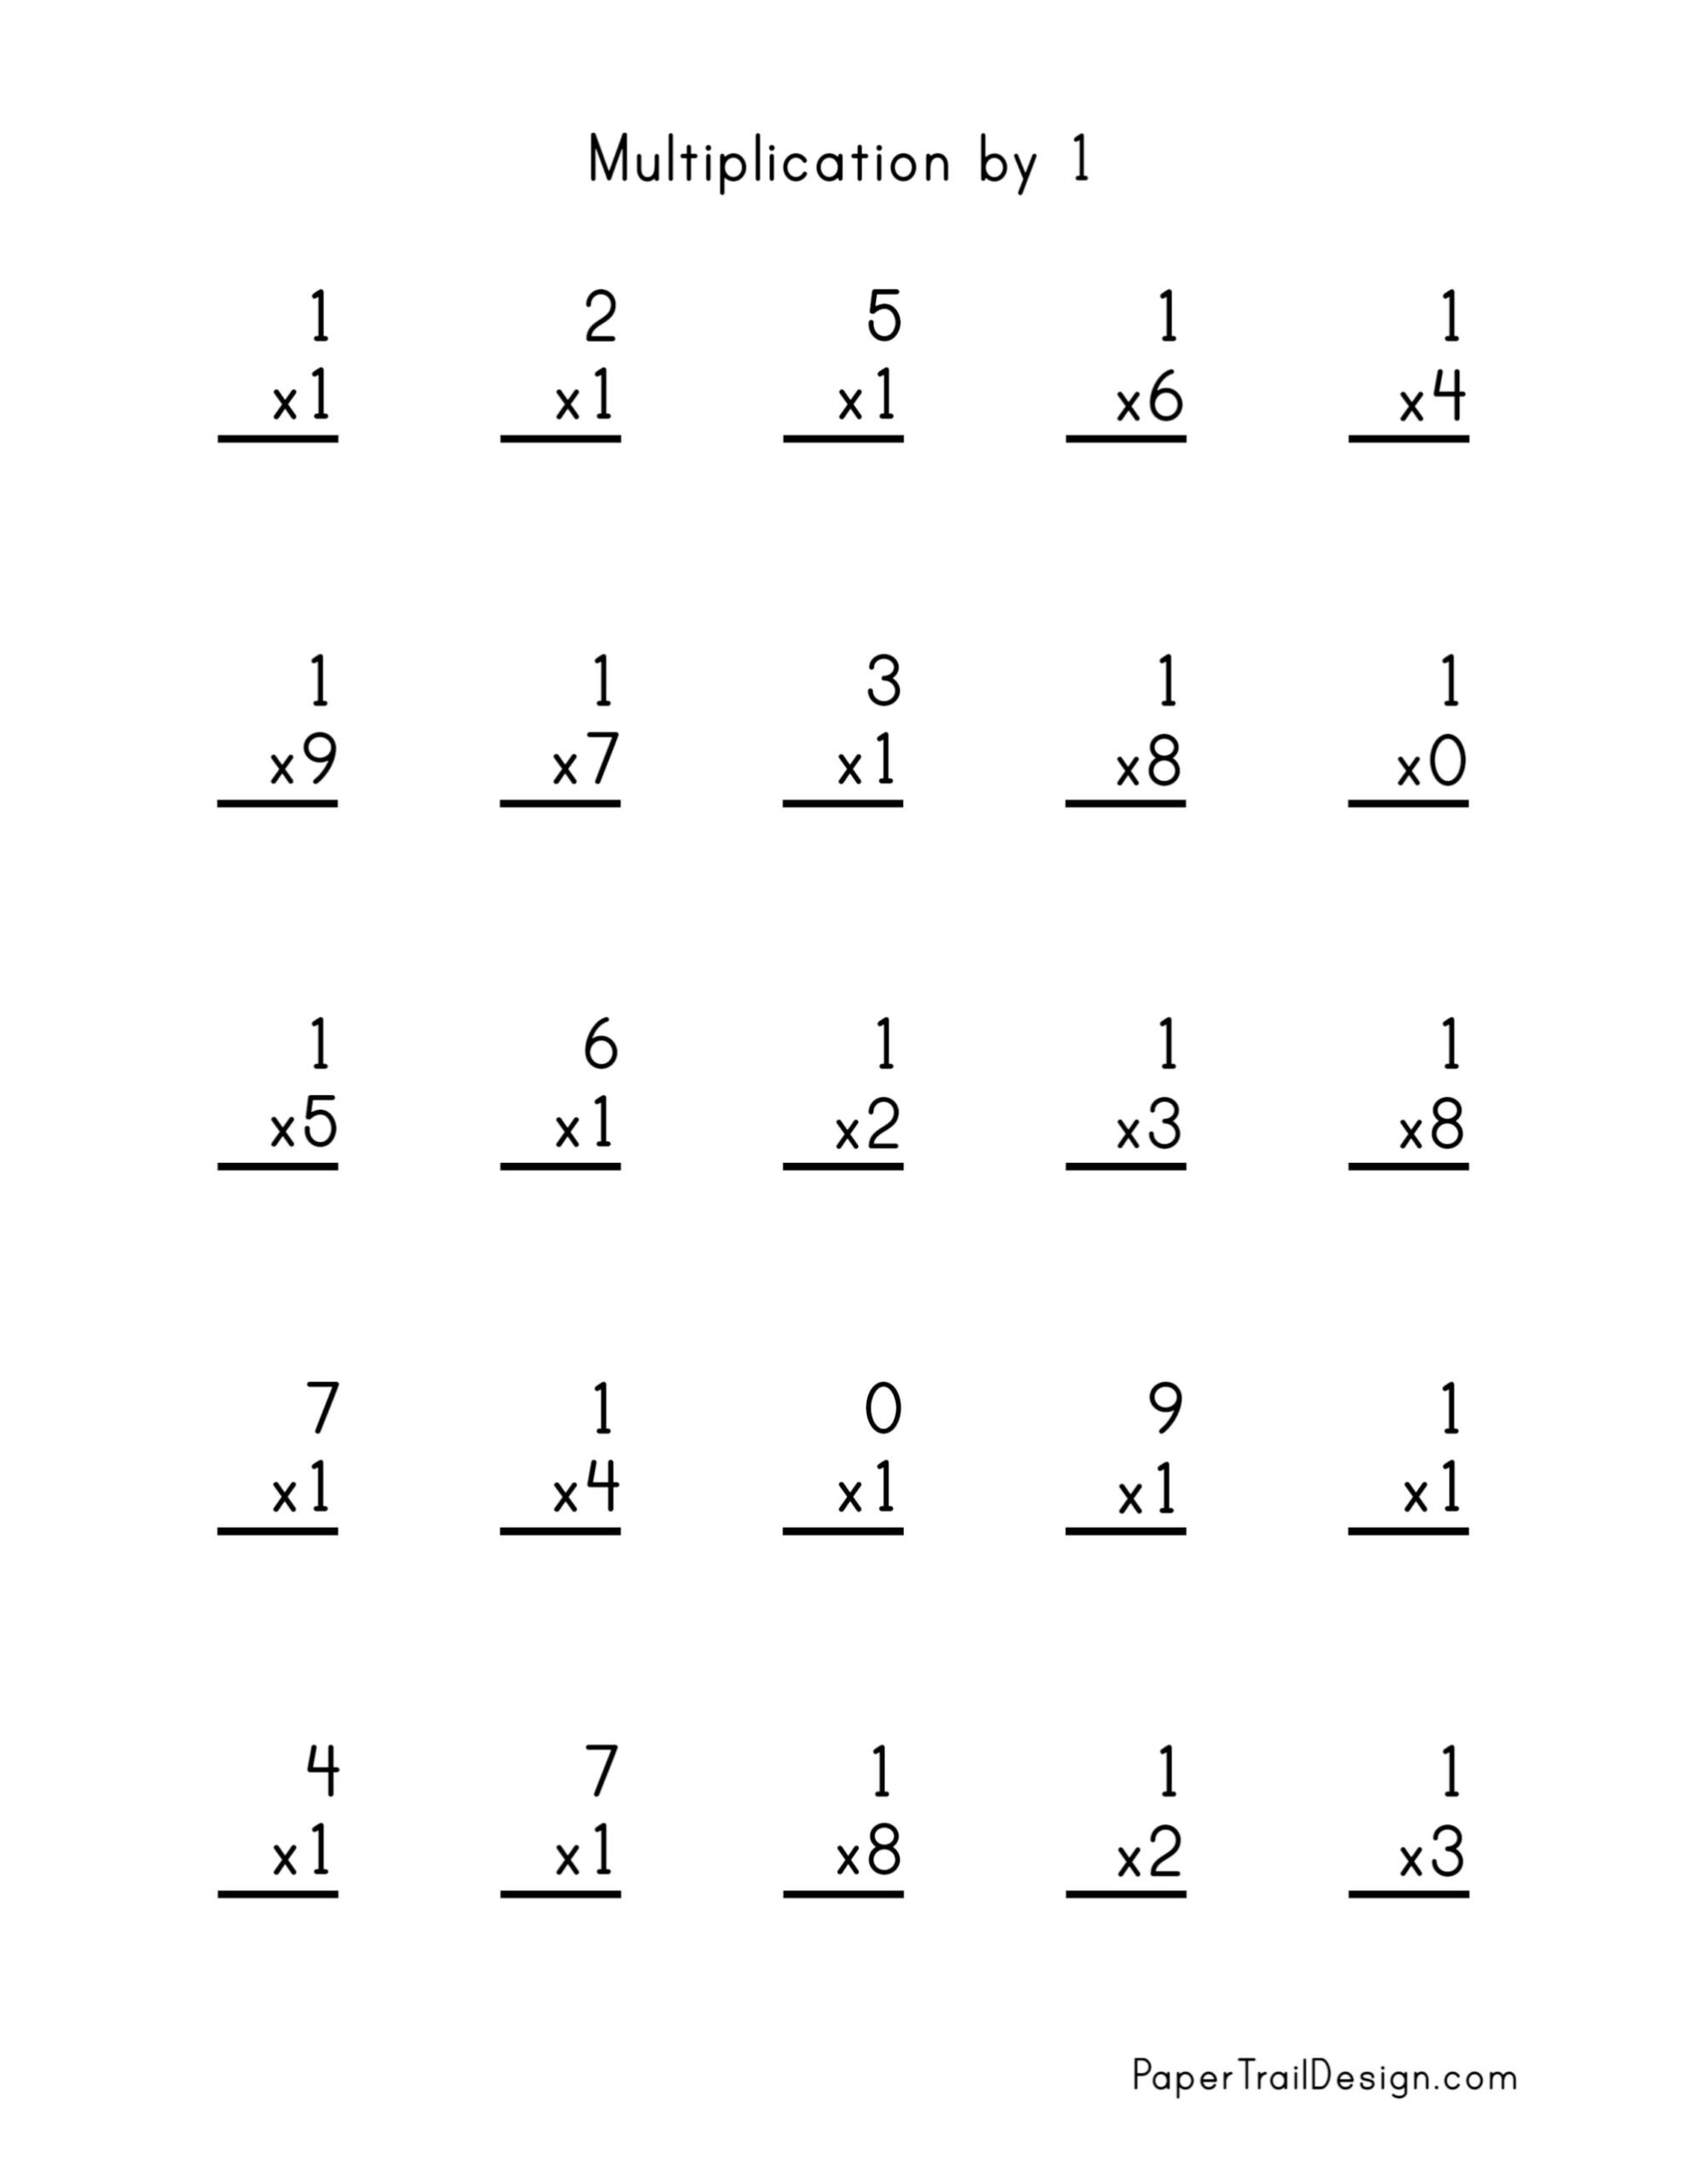 Multiplication Facts Practice Worksheets Free